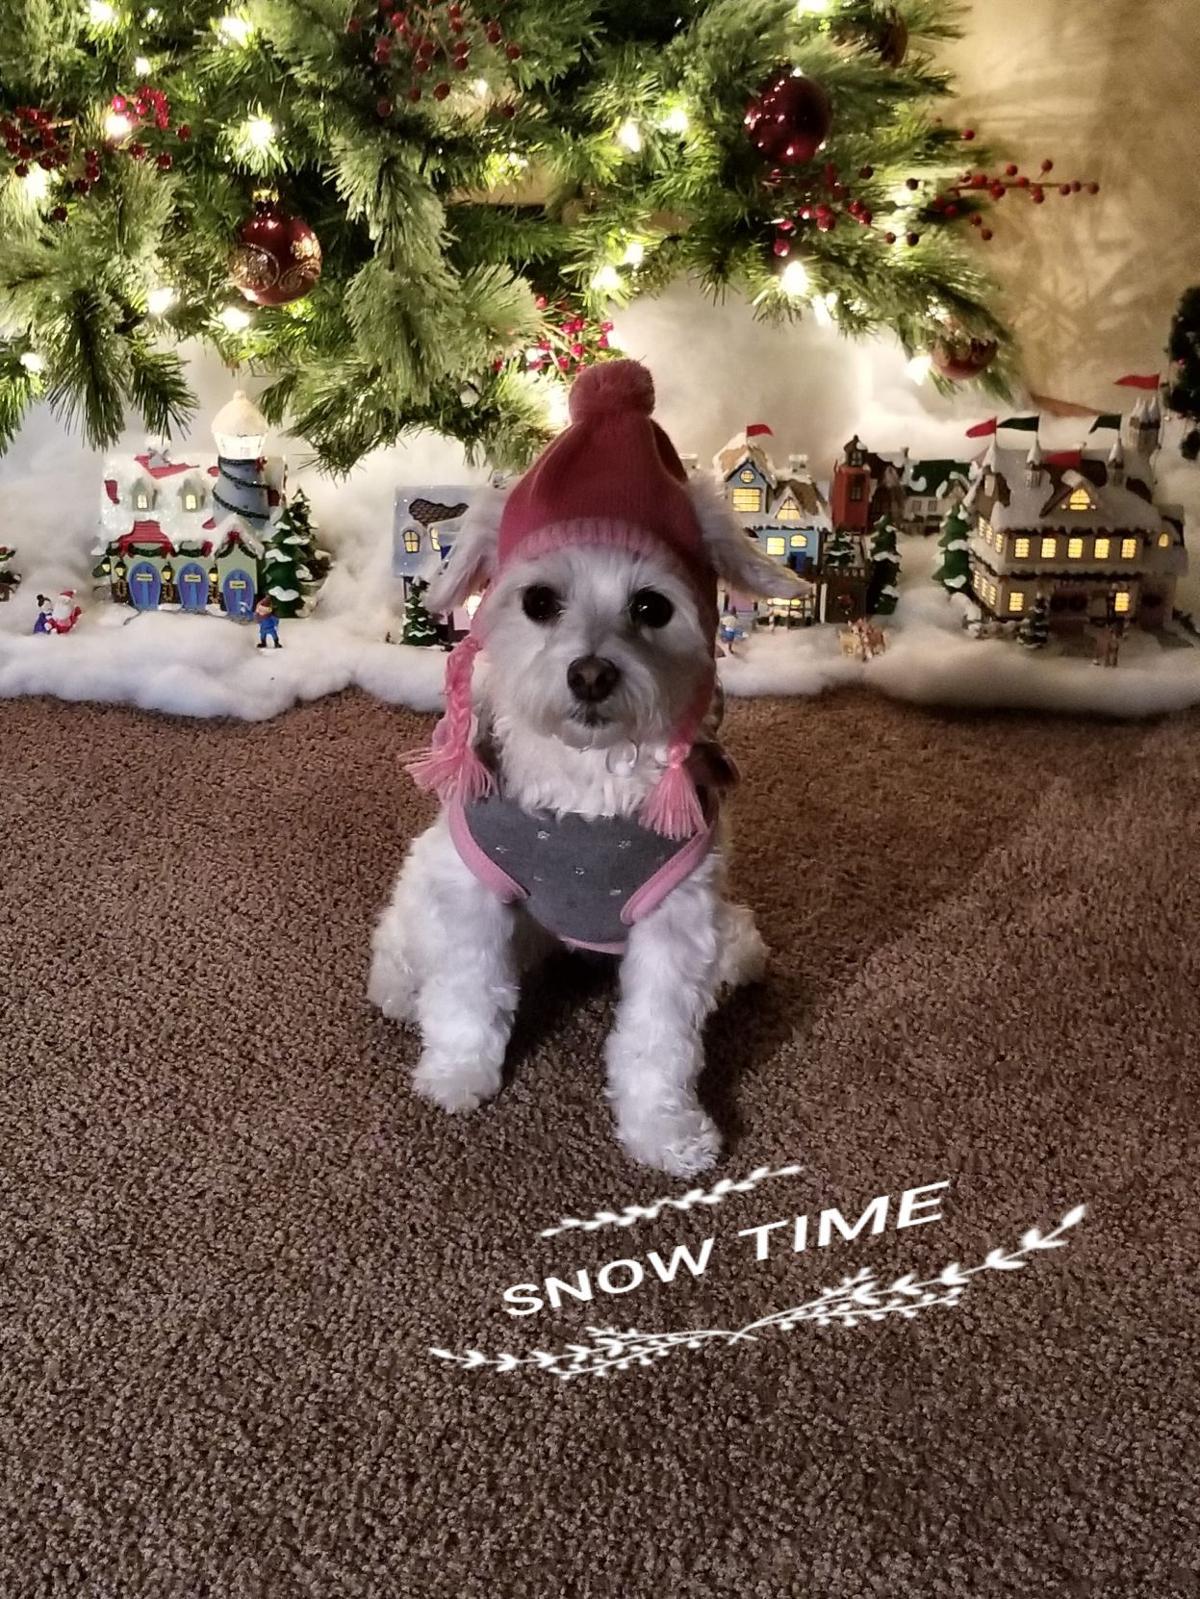 Gallery The Times Cutest Pets of Winter 2018 Contest Lifestyles Pets